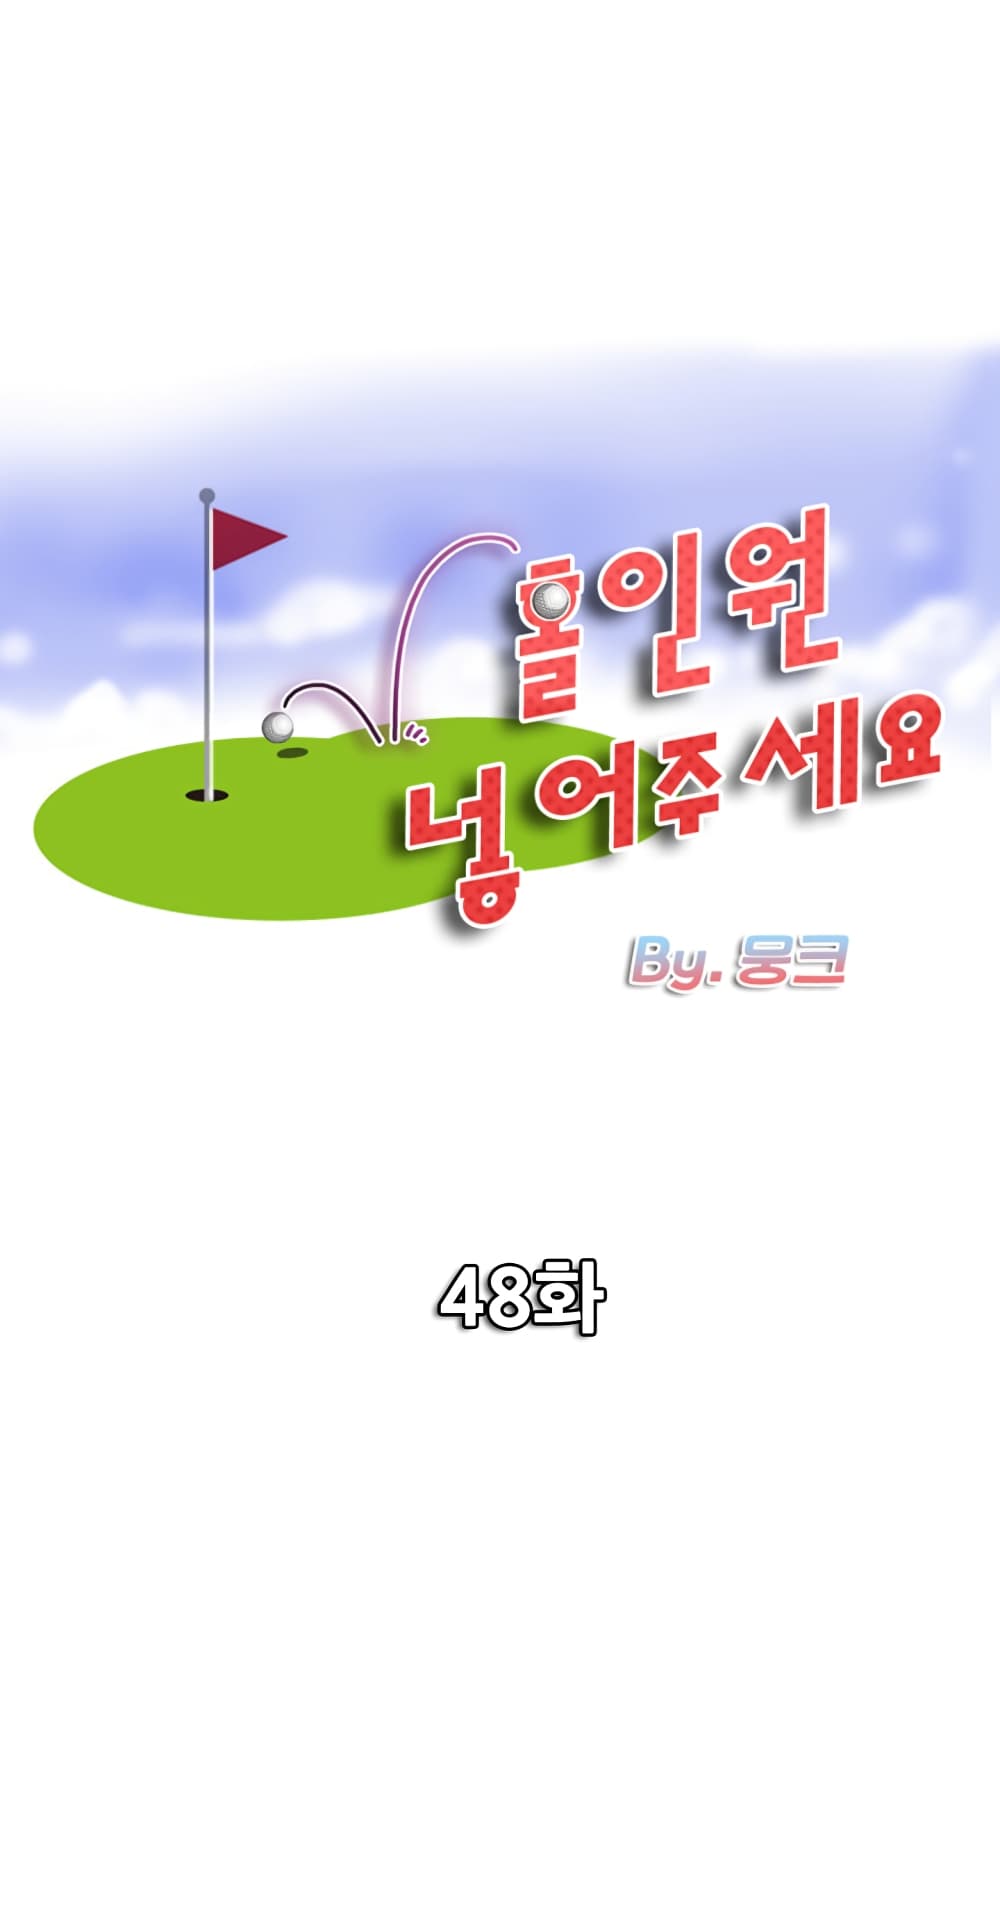 Hole In One 48 (1)